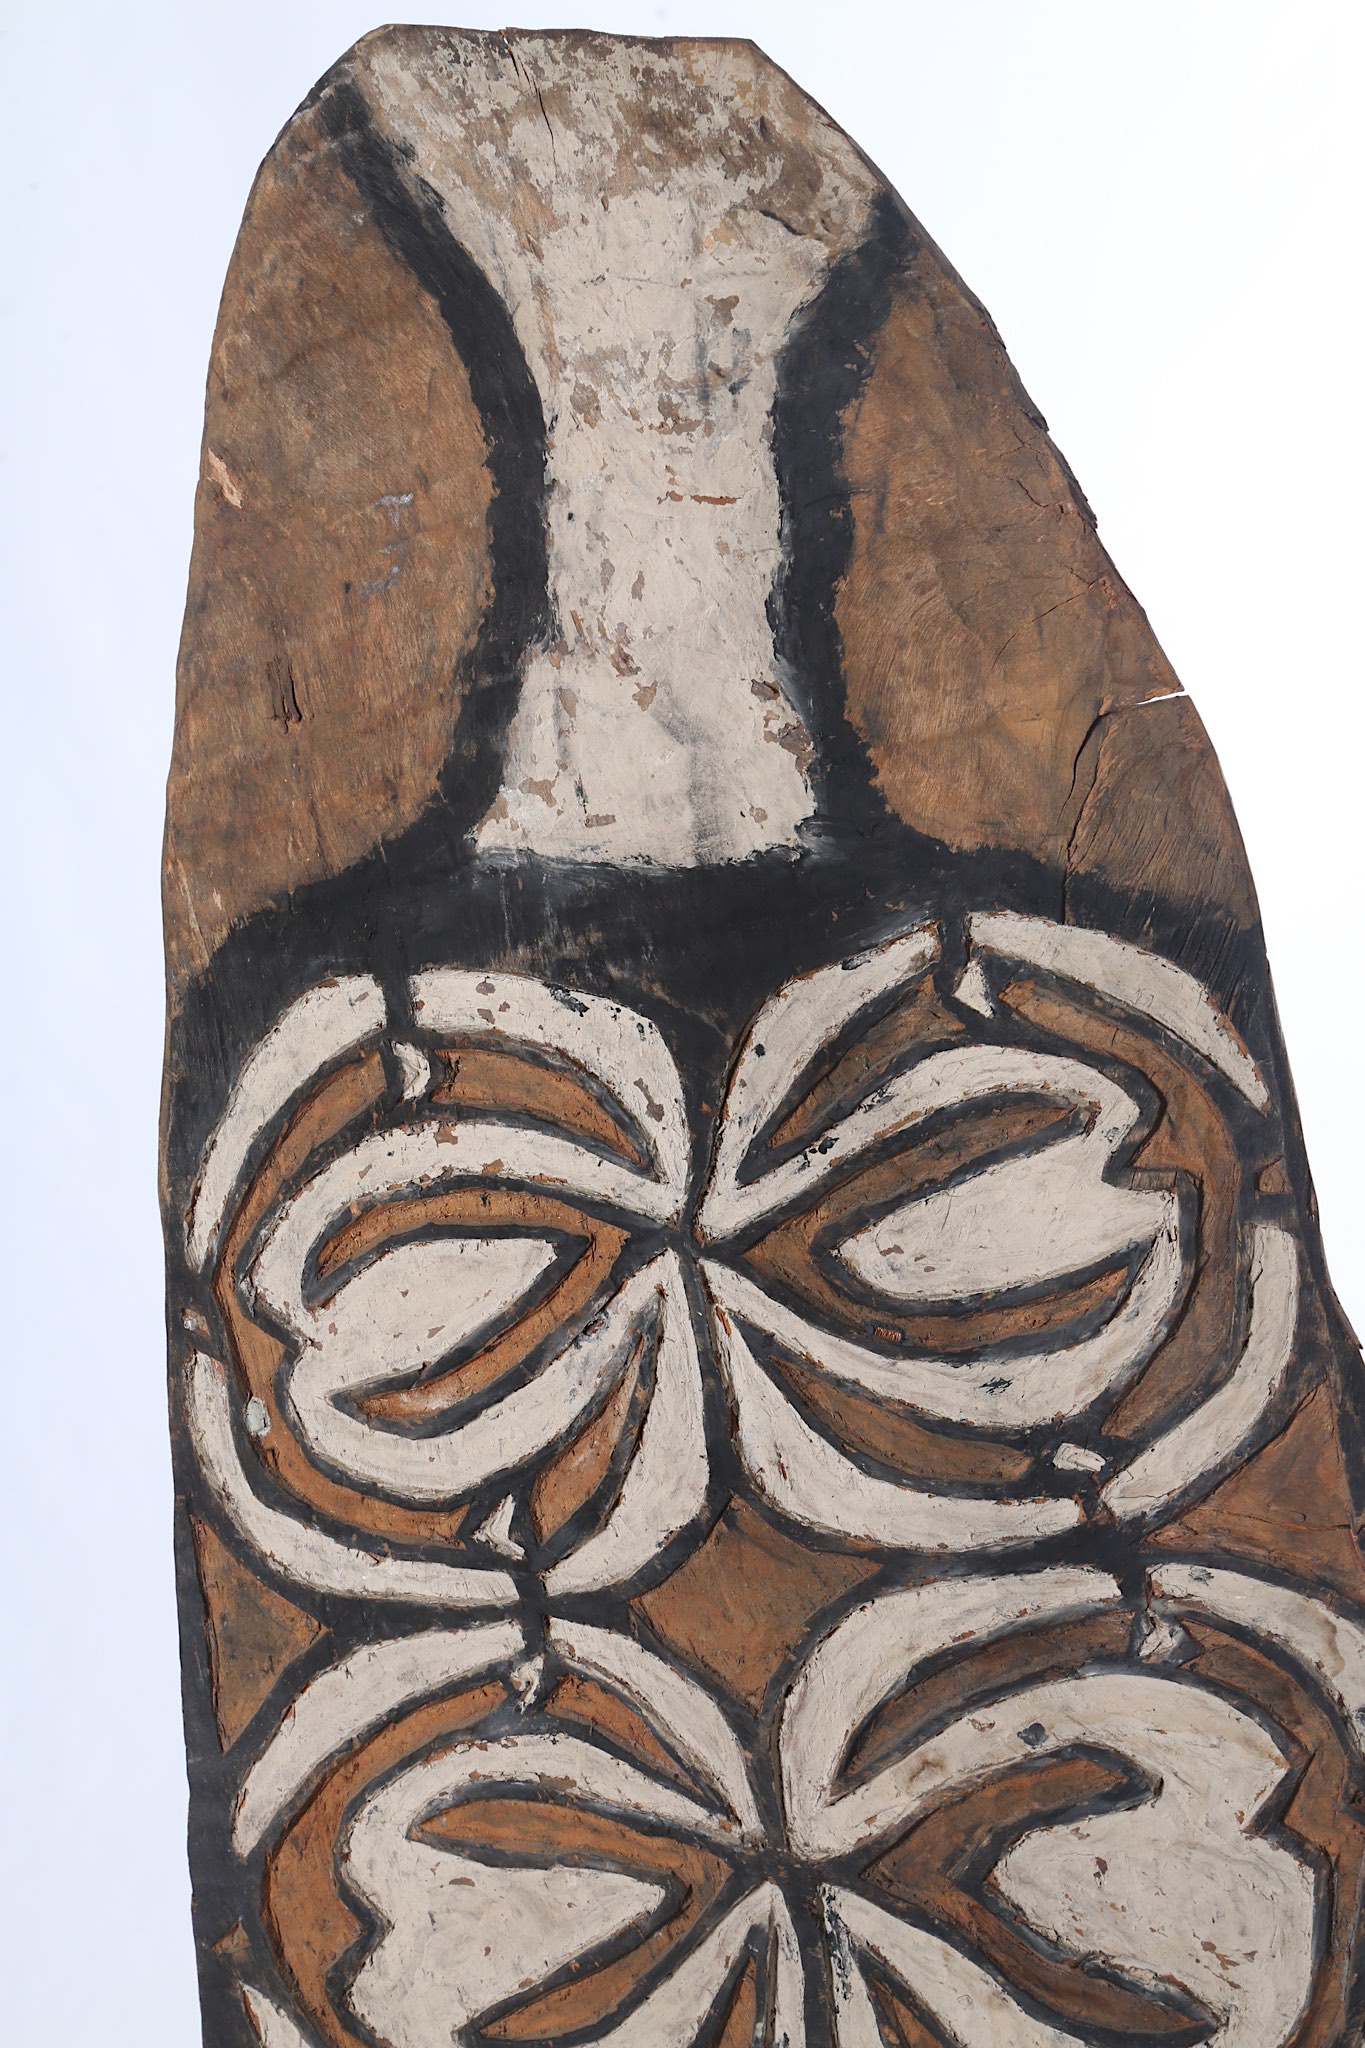 TWO KOROWAI SHIELDS, WESTERN PAPUA NEW GUINEA Both shields of oblong form with a curved top, the - Image 4 of 5